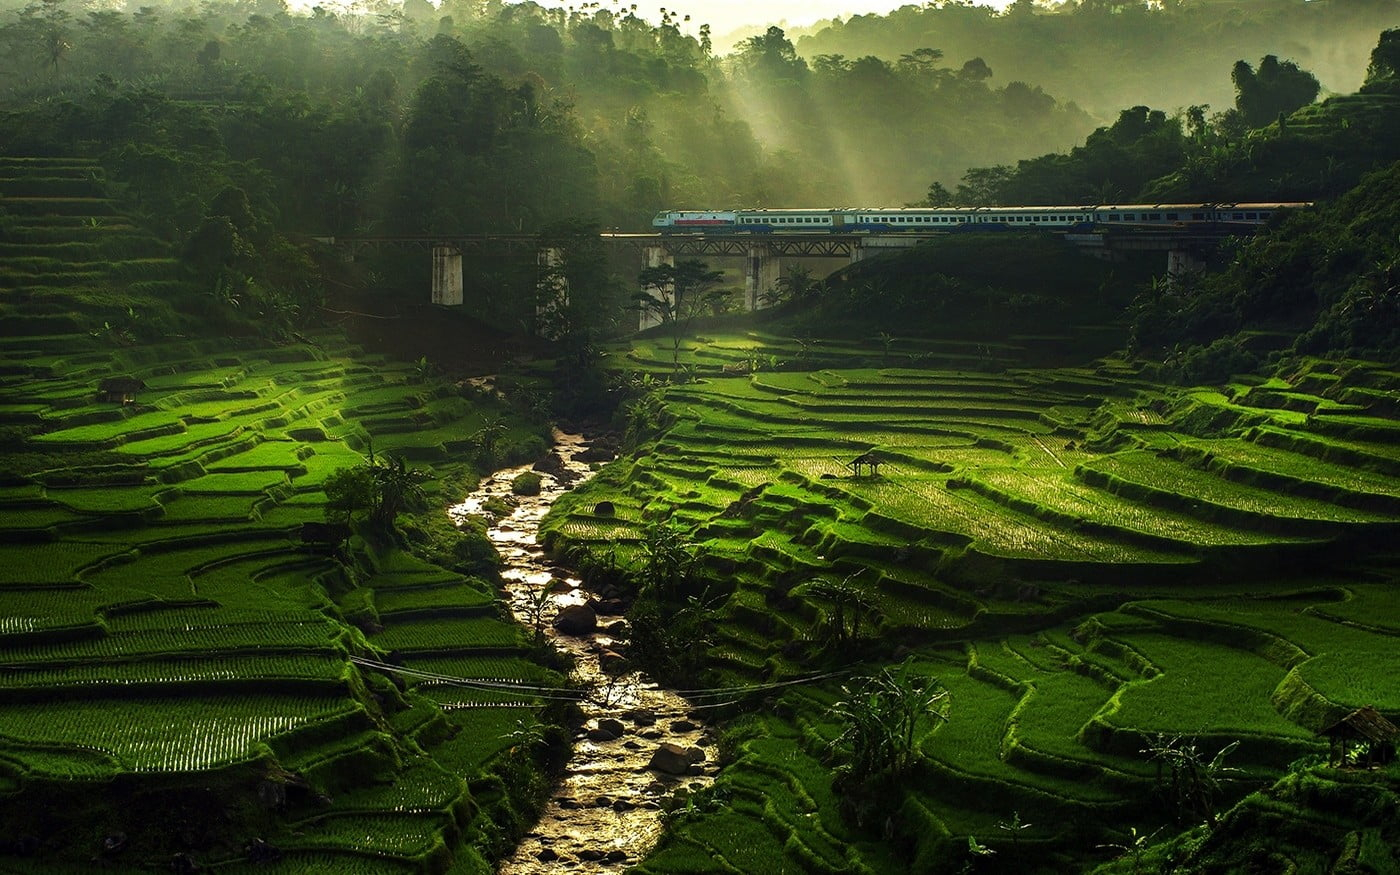 Hill landscape wallpaper, nature, rice paddy, river, sun rays, field, terraces